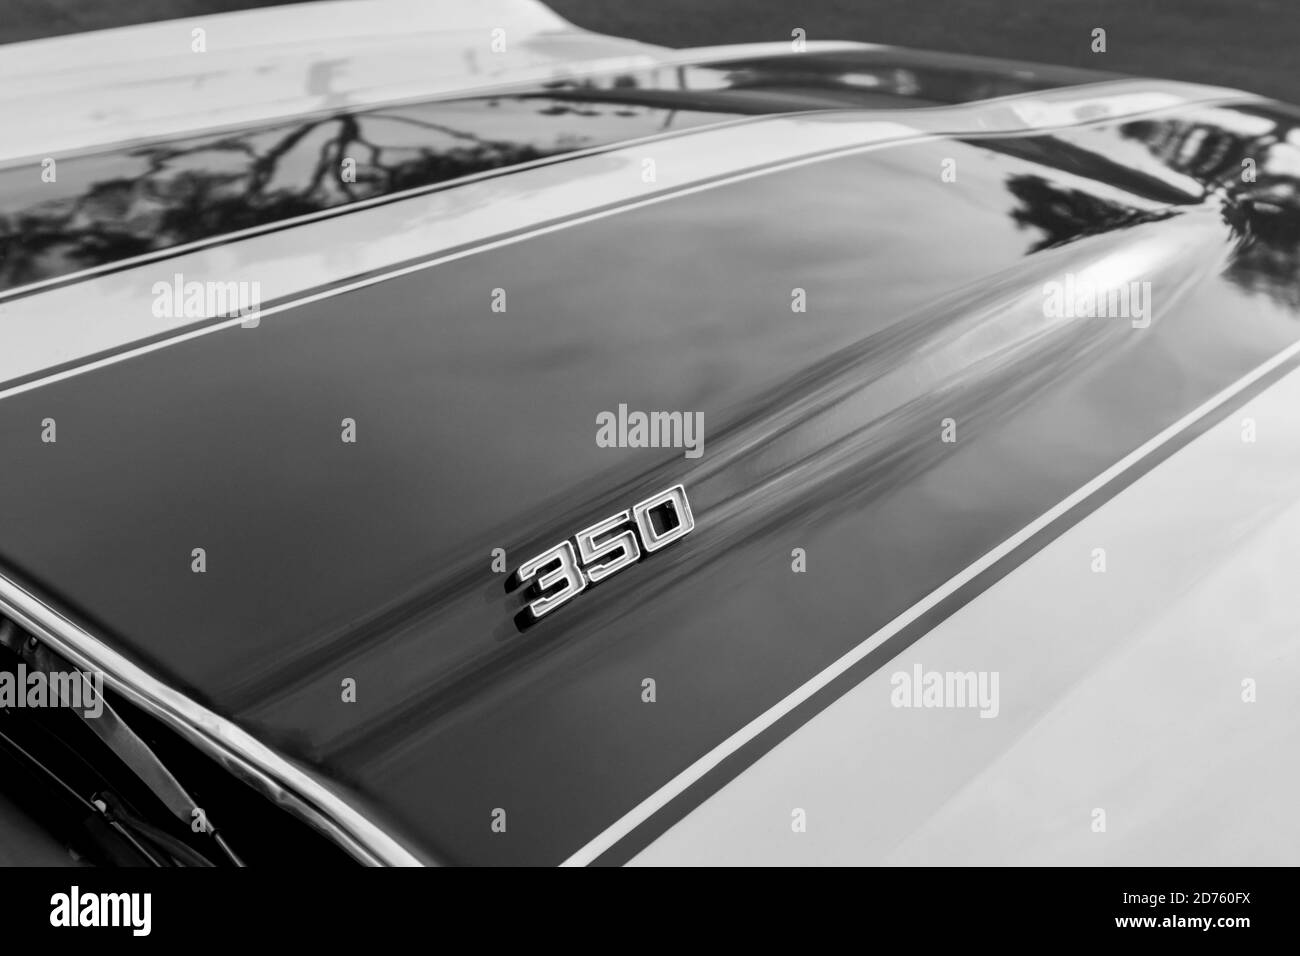 Black and white photo of the hood of a 1971 Chevy Chevelle muscle car Stock Photo